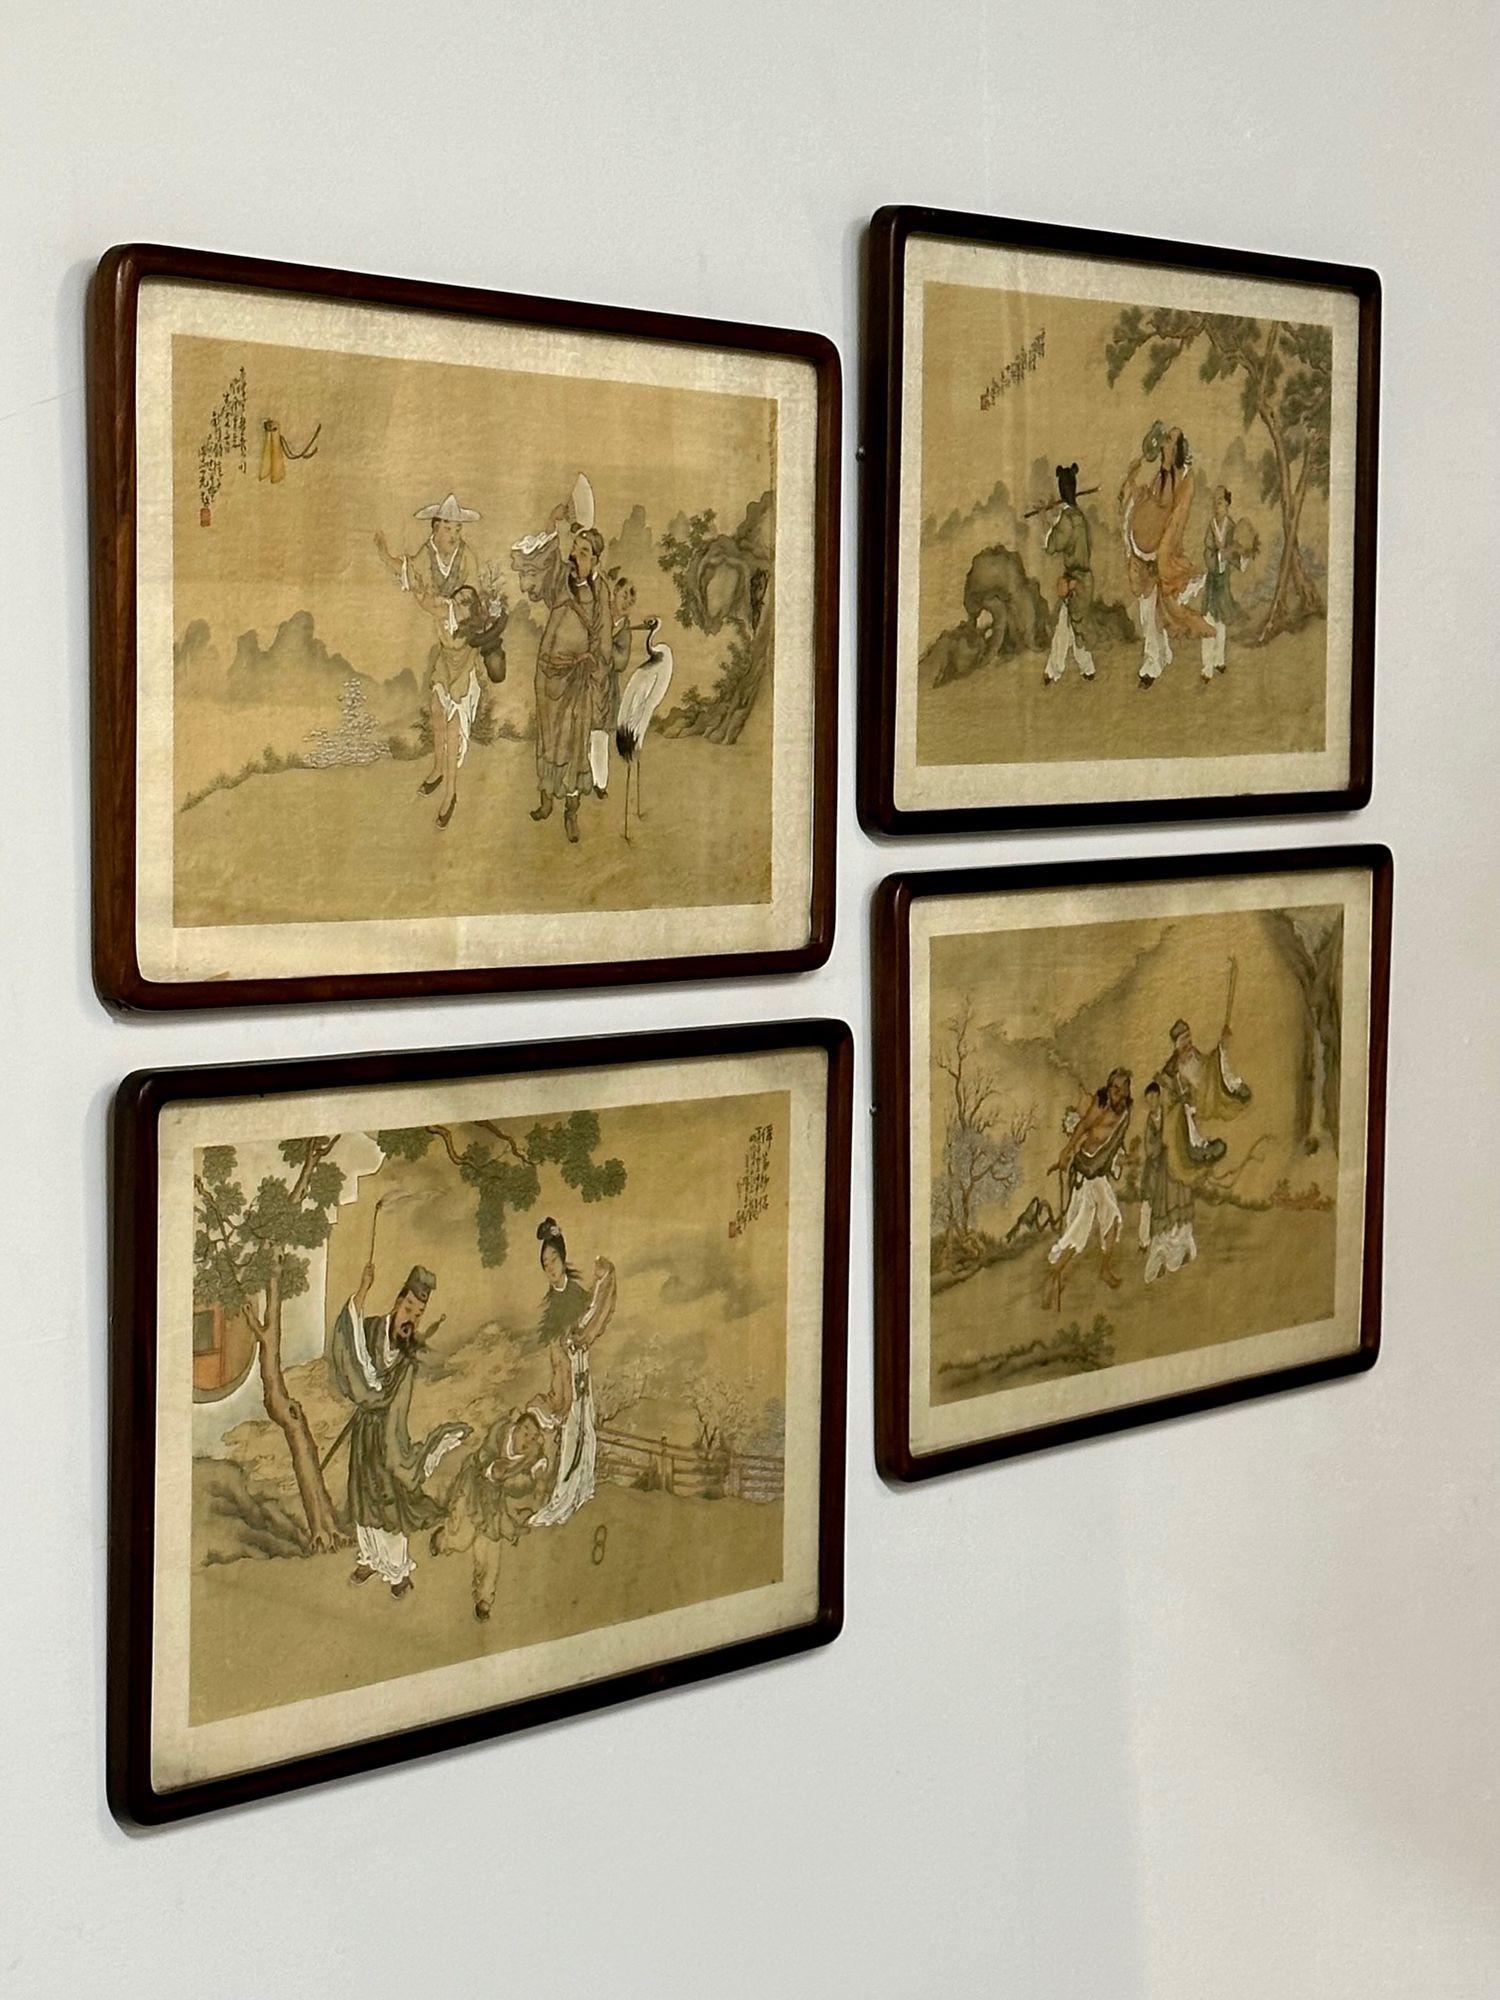 Set of Four Chinese Paintings in Rosewood Frames, Signed, 19th Century, Oil Canvas

Stunning example of Oriental works on canvas on wood. Each in a fine custom rosewood frame, matted. The set depicting a story of a band leader and his musical tribe